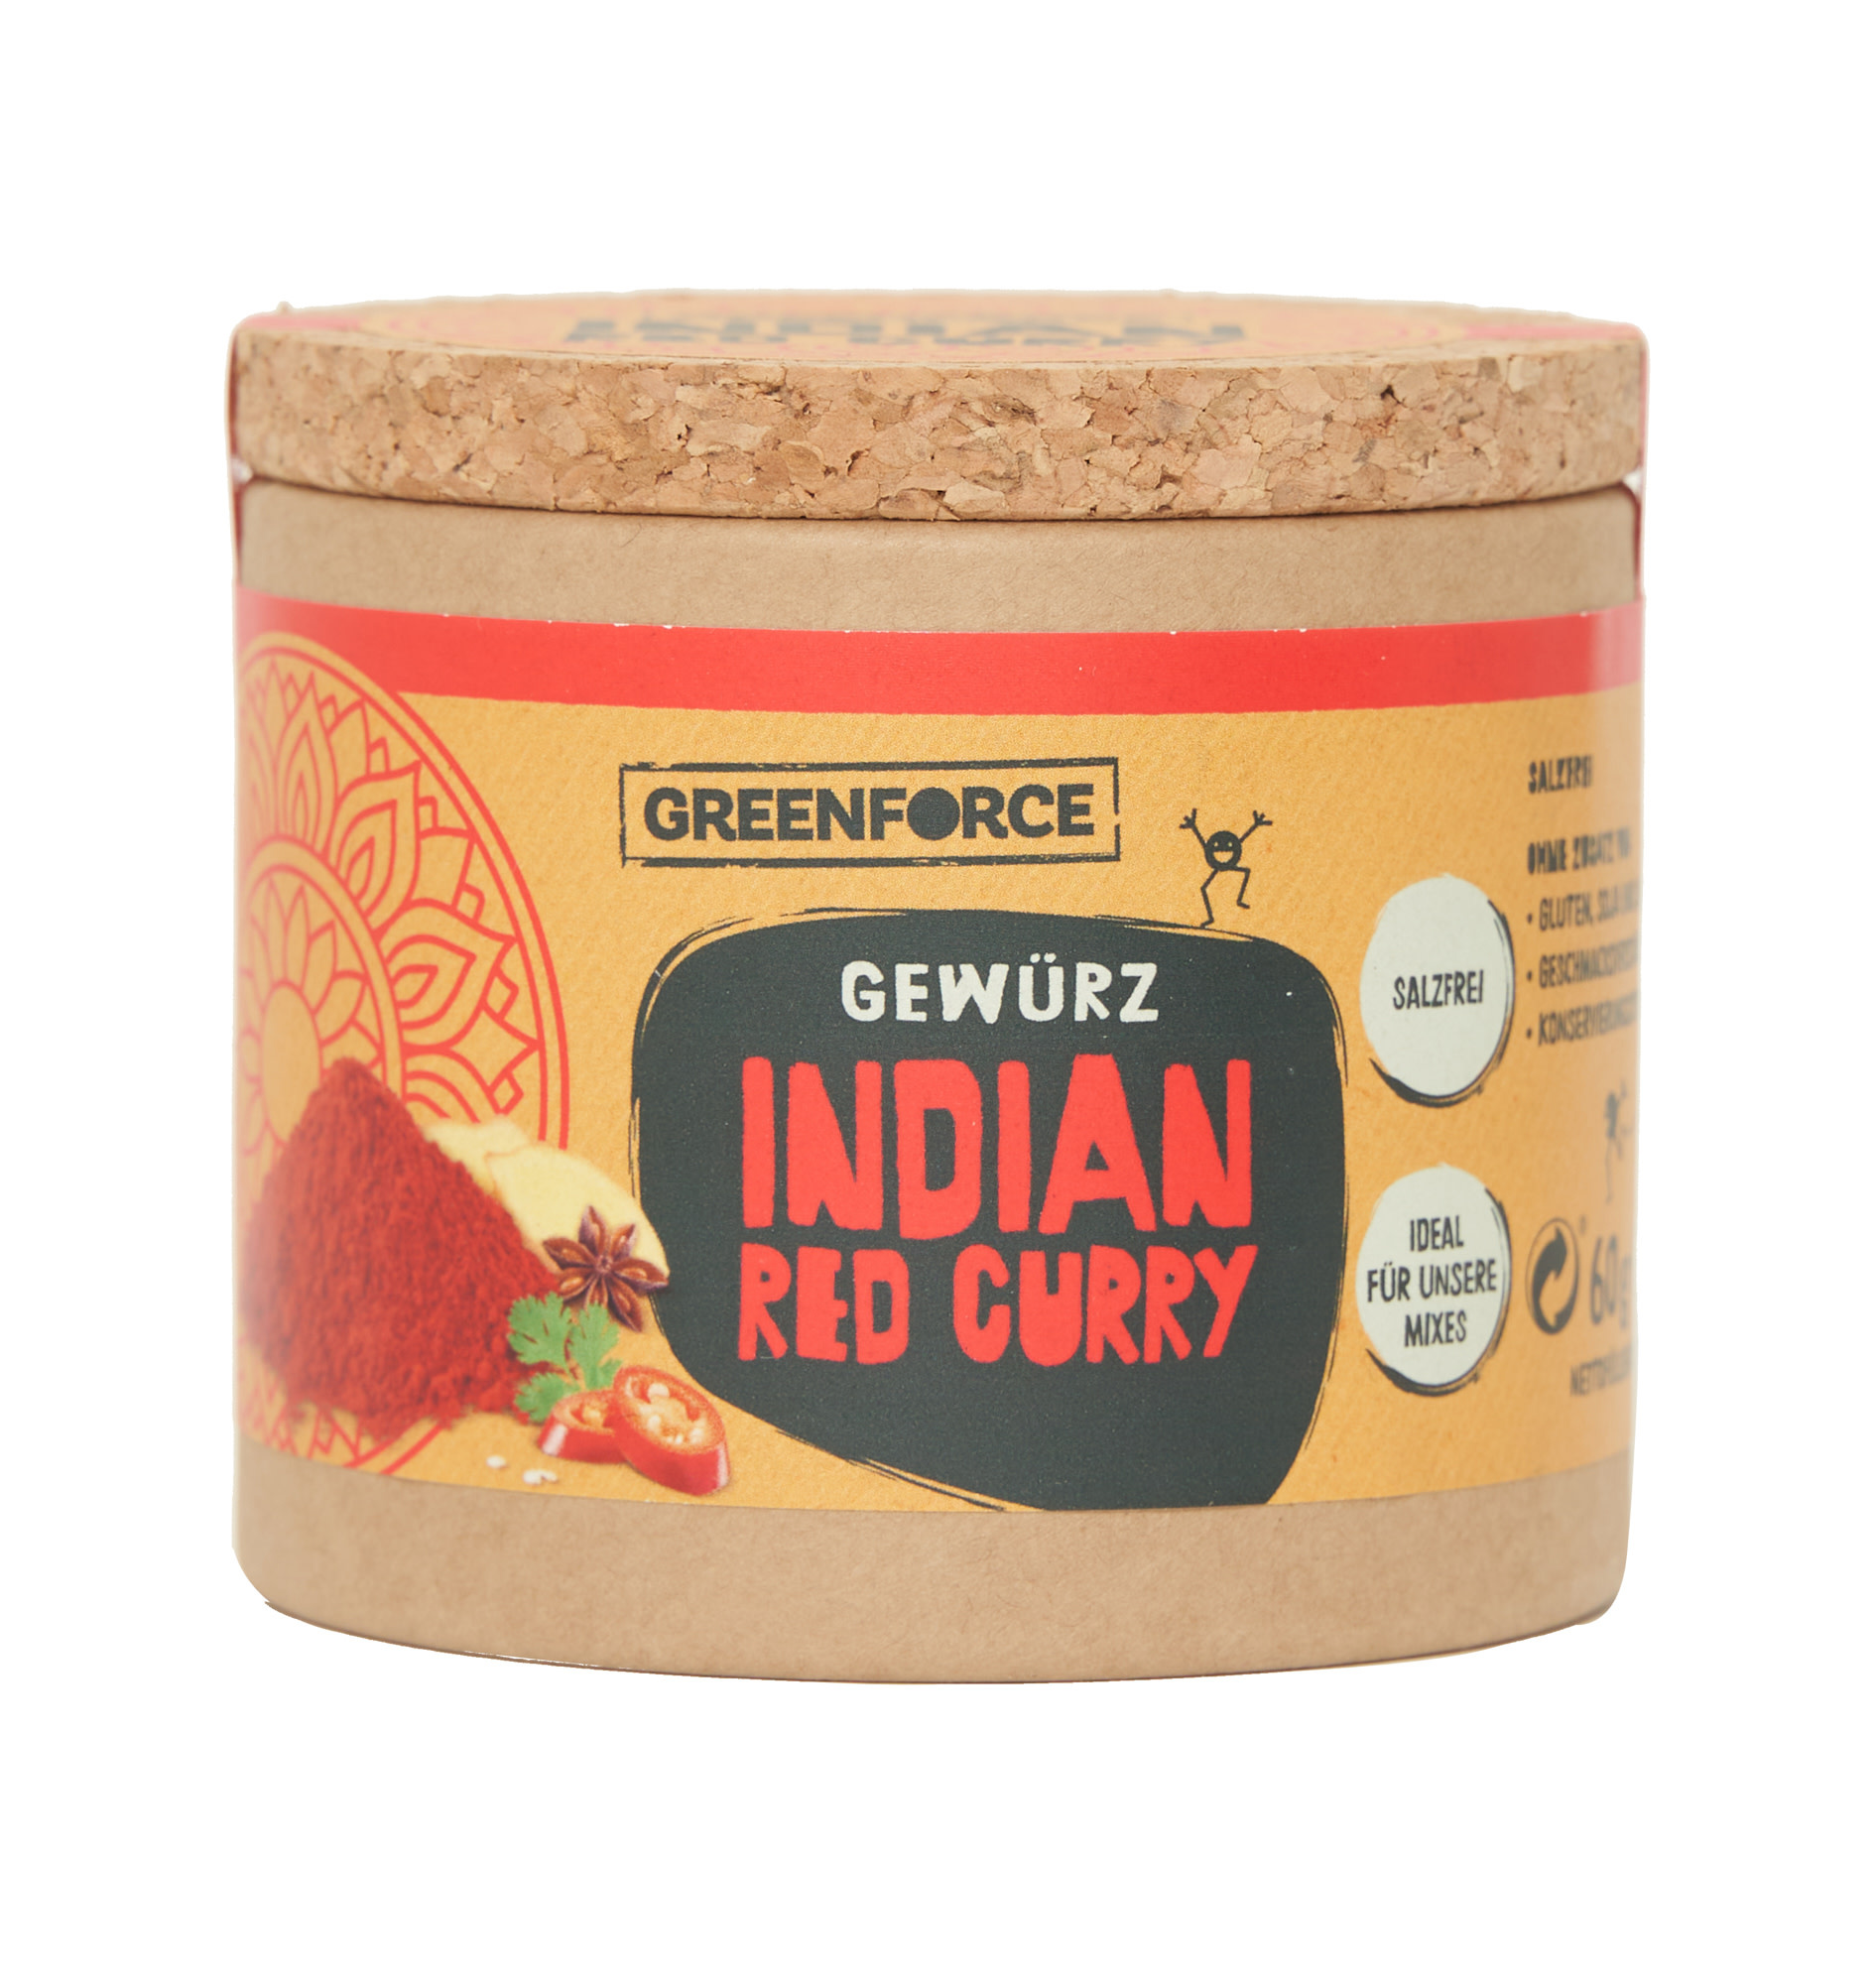 GREENFORCE Vegan Indian Spice - Indian Red Curry perfect for red curries & sauces